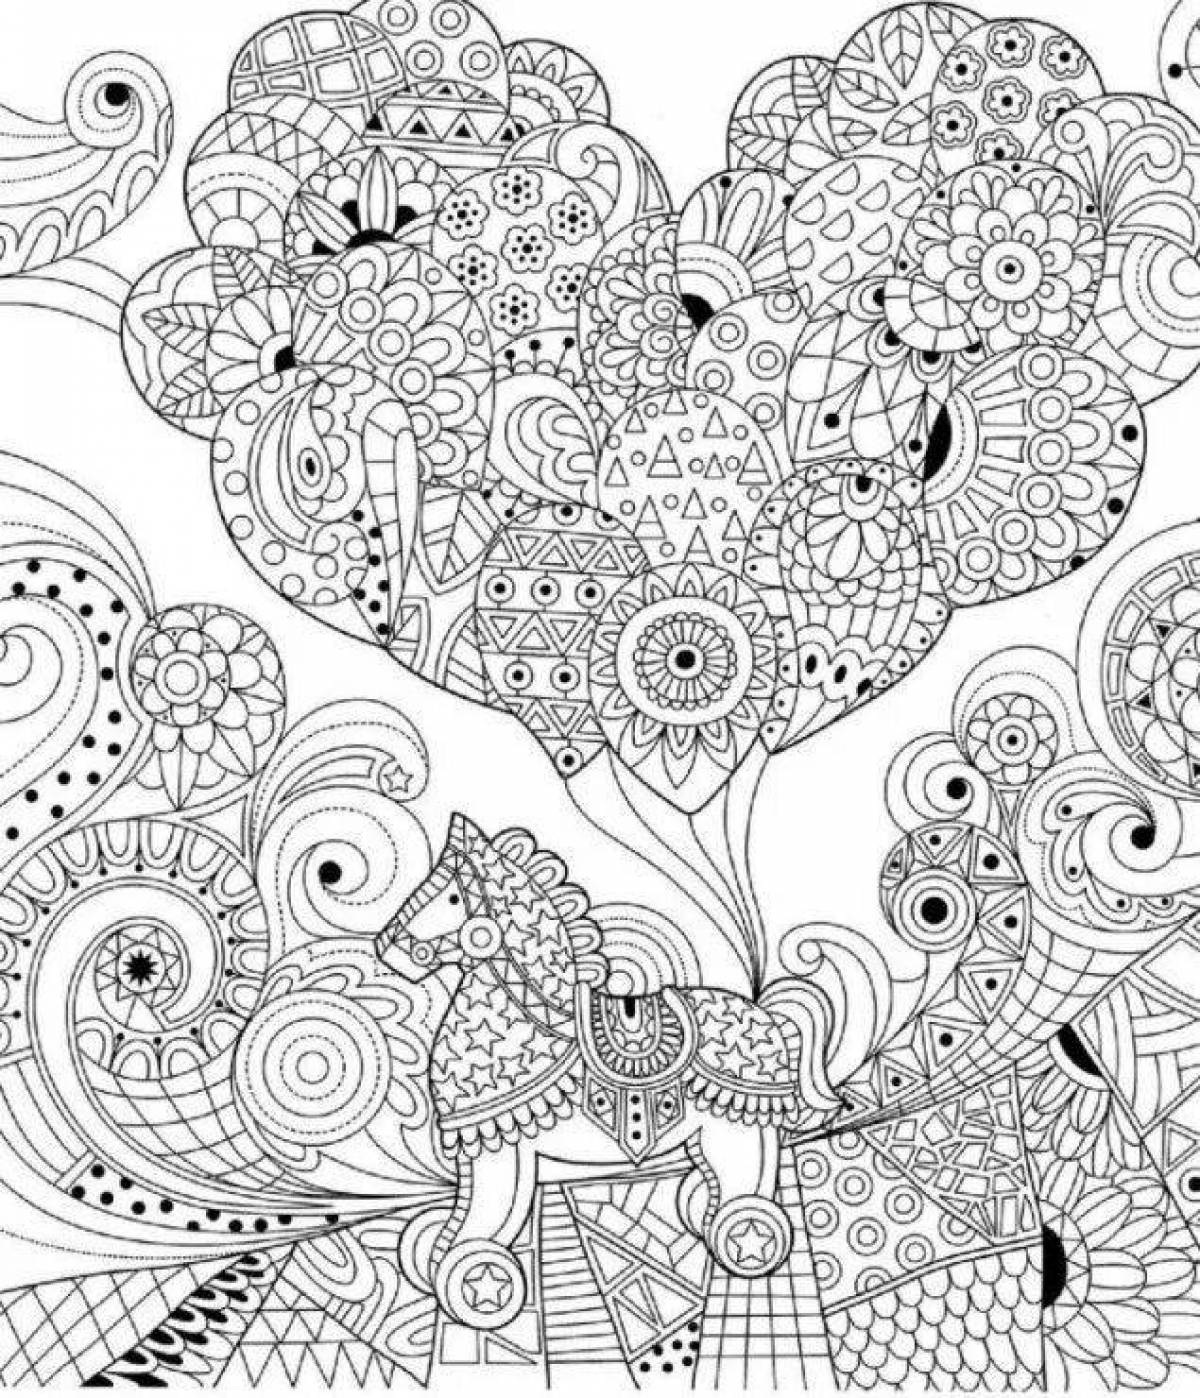 Refreshing coloring book for adult children